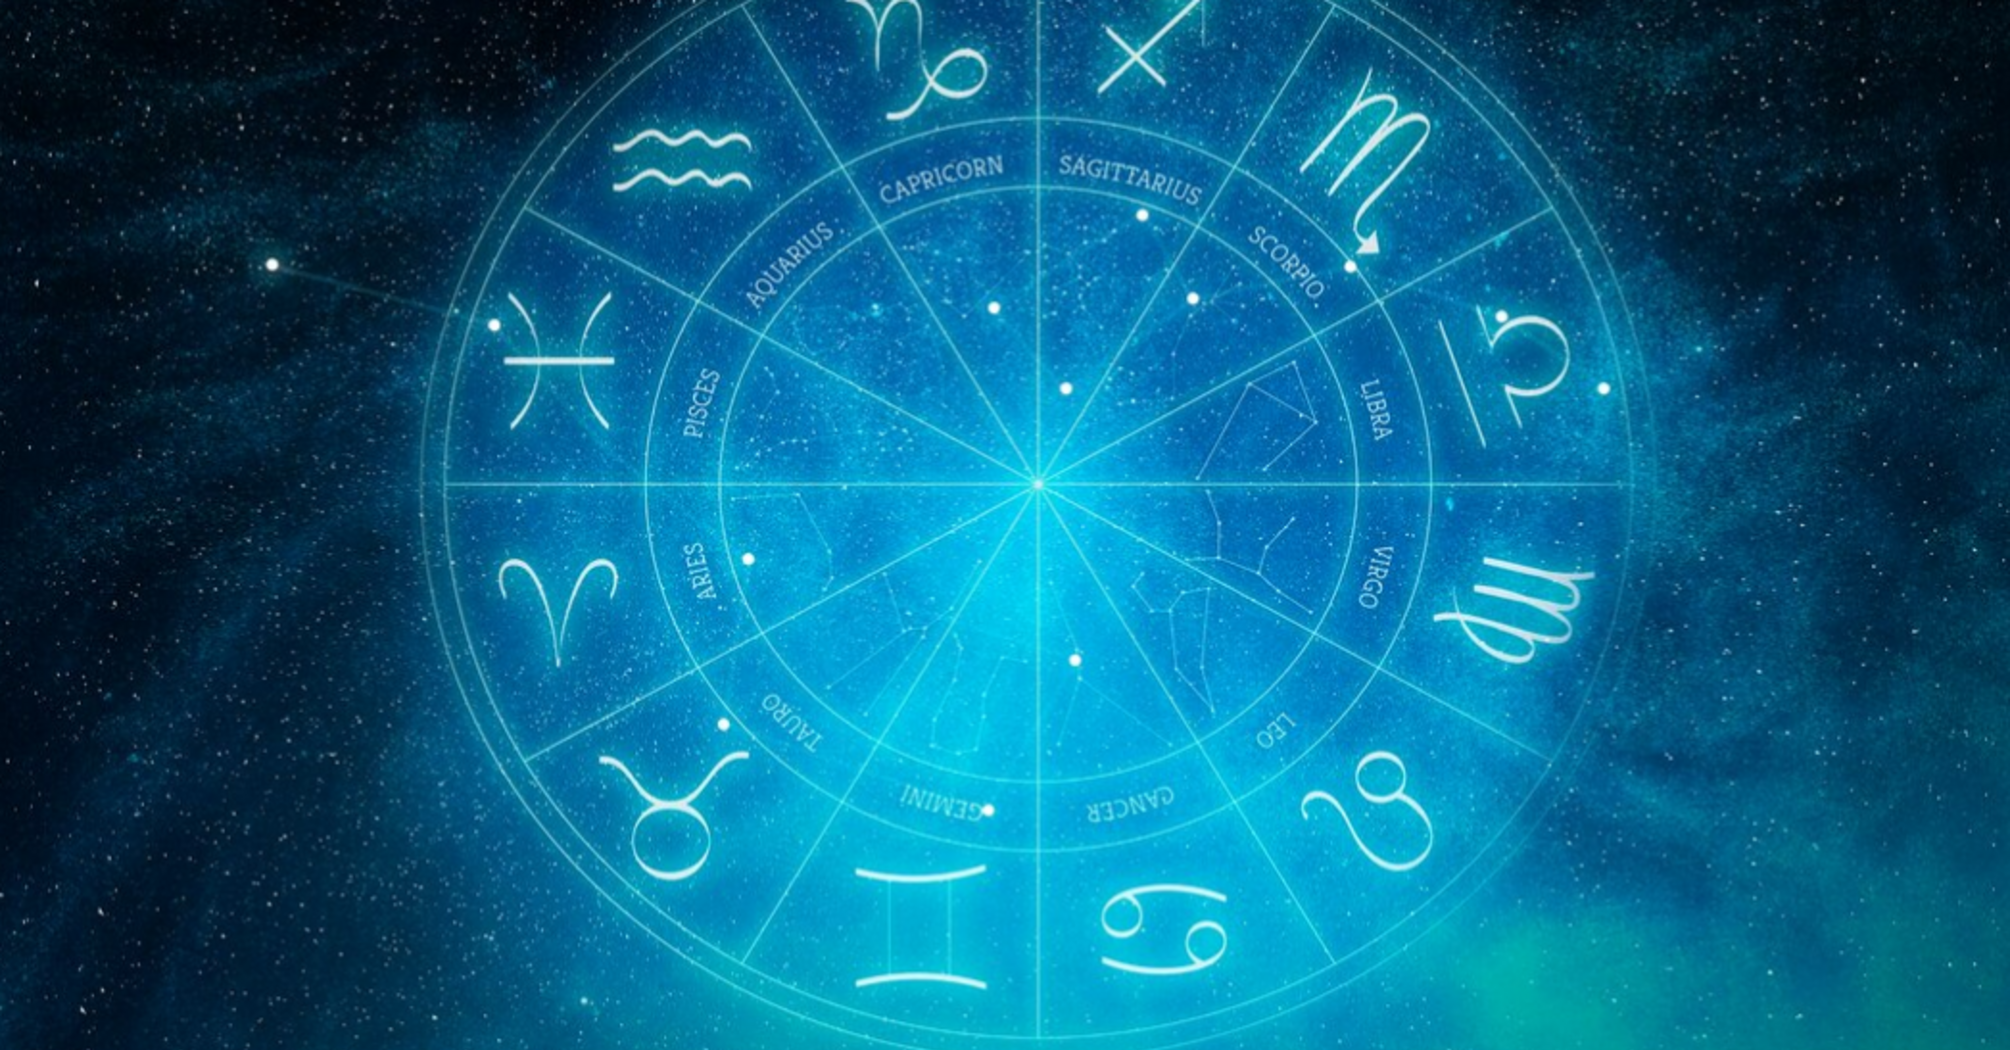 A good day for accepting new opportunities and positive changes: horoscope for all zodiac signs for April 20